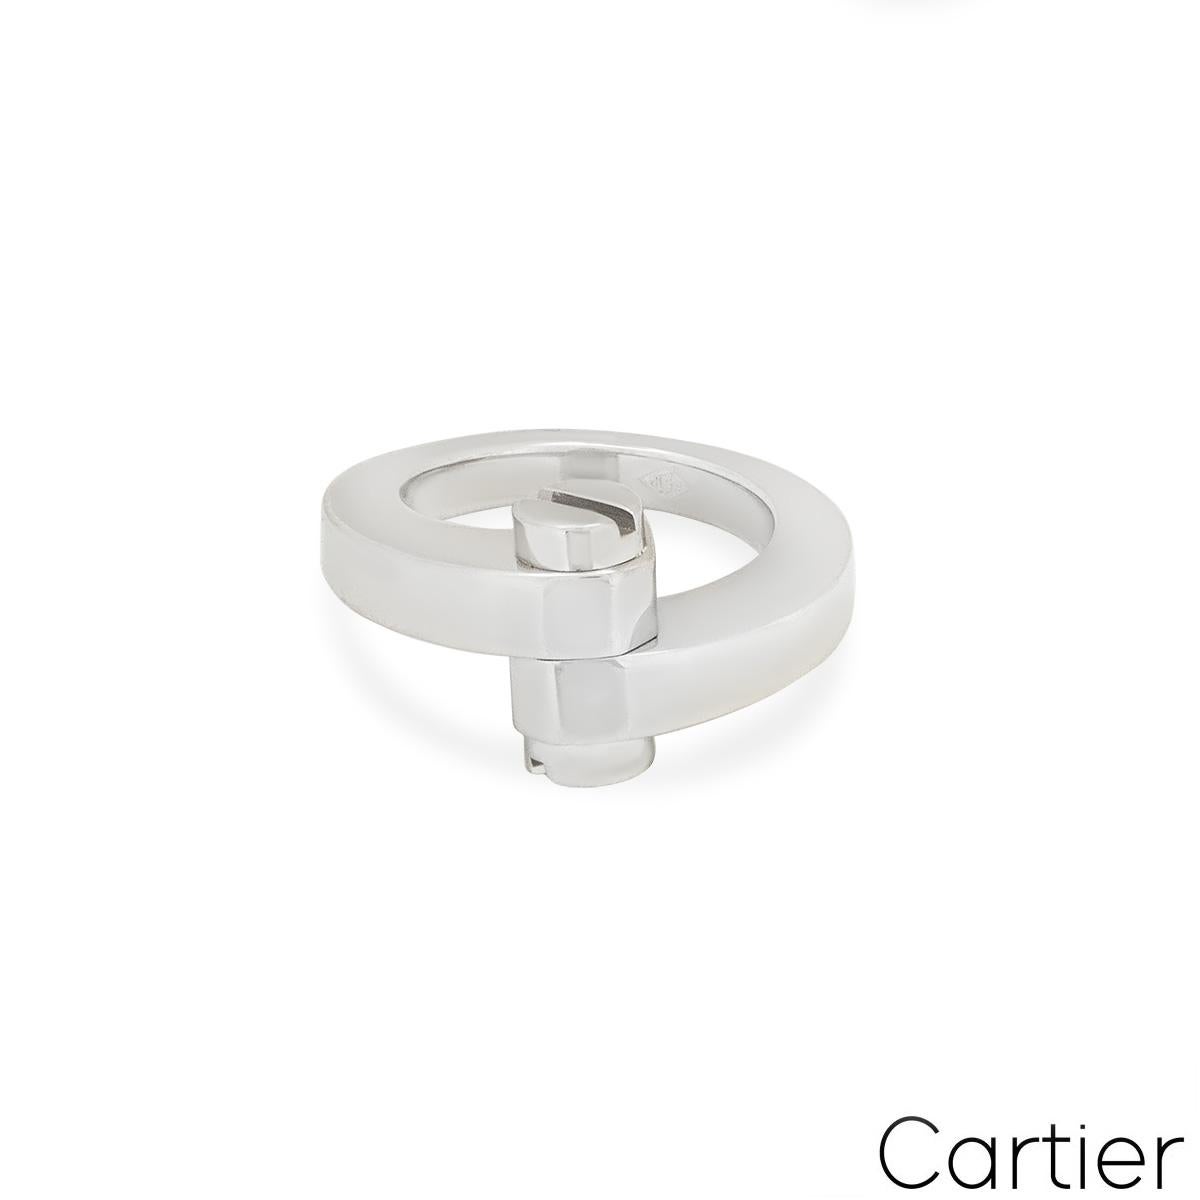 Cartier White Gold Menotte Ring In Excellent Condition For Sale In London, GB